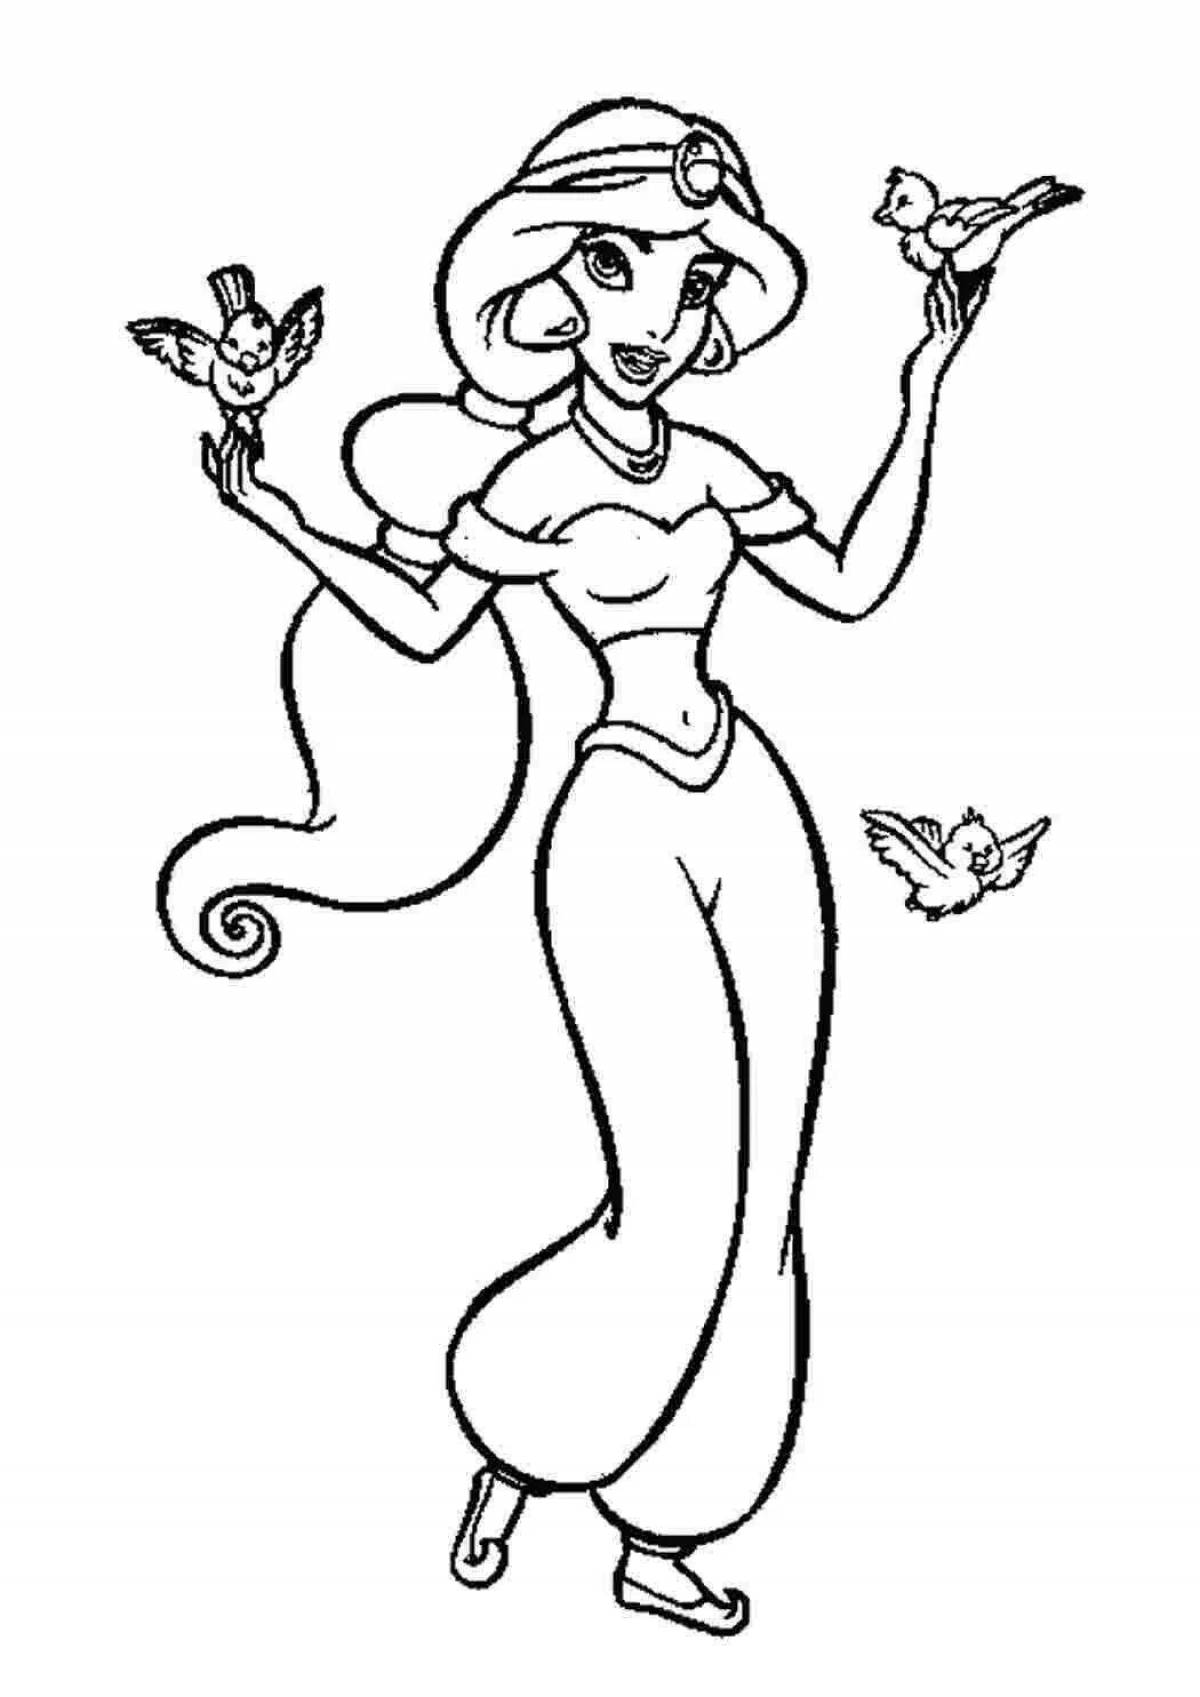 Charming jasmine coloring page